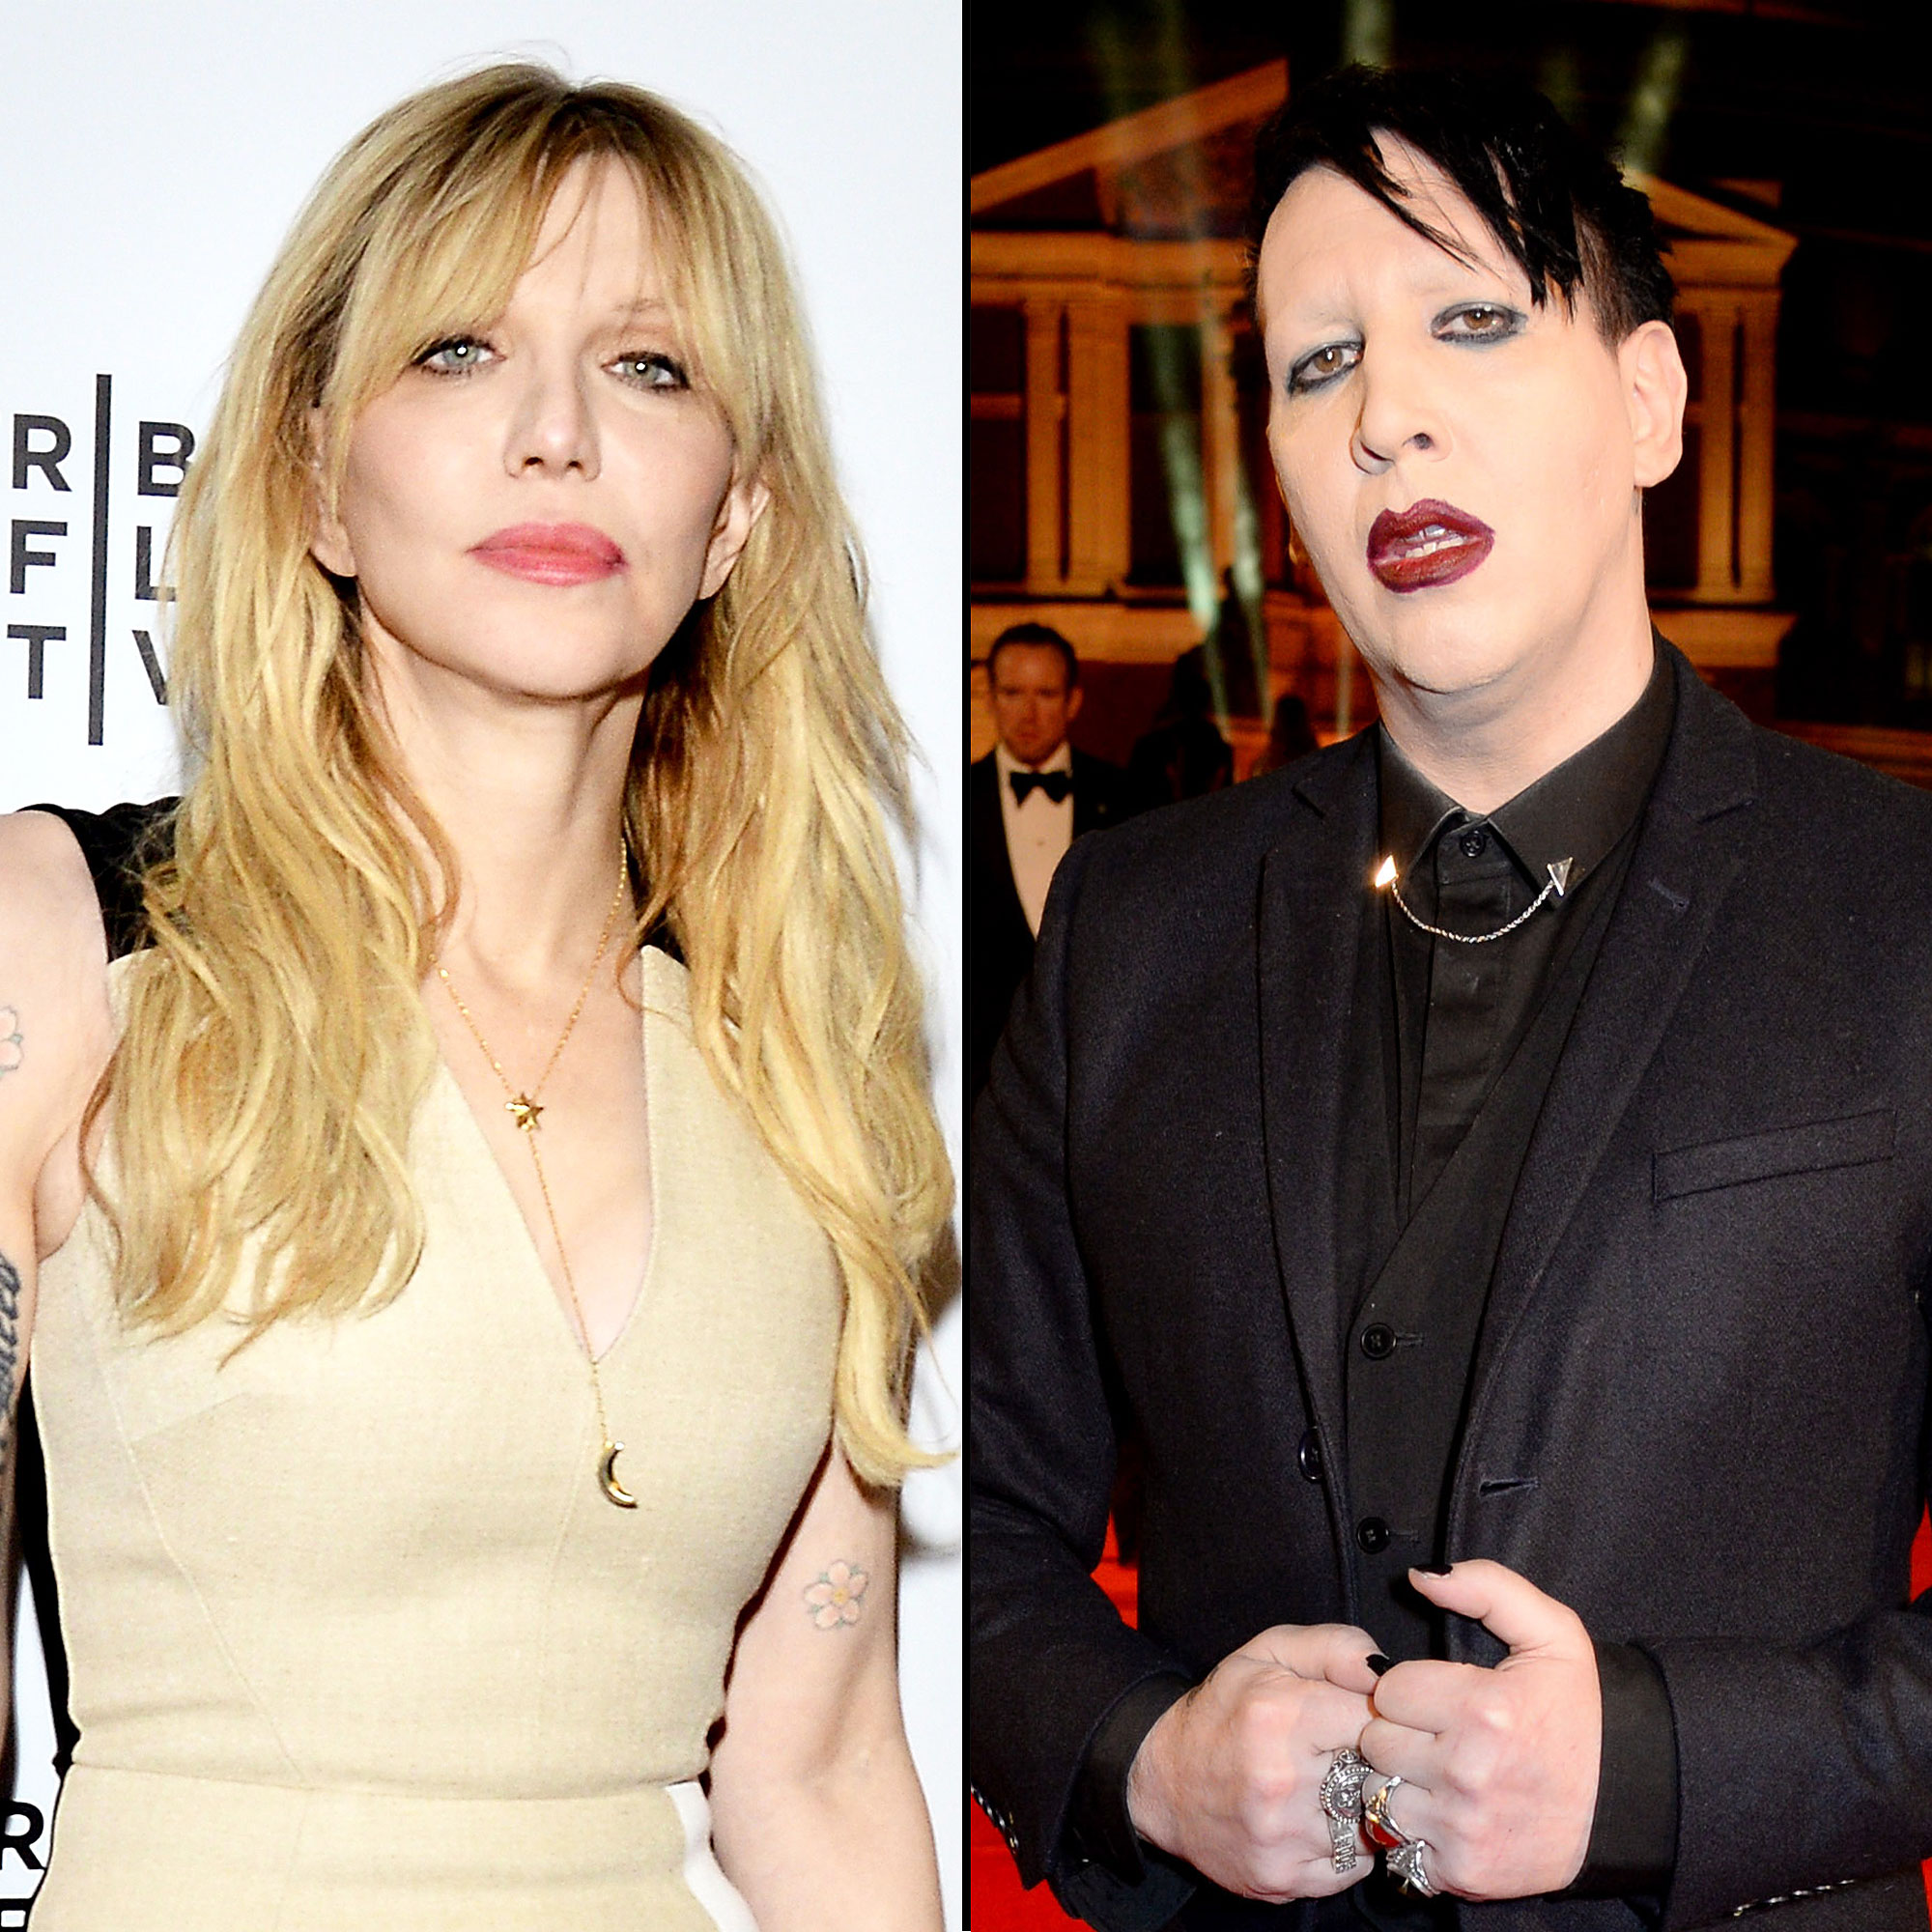 Marilyn Manson Courtney Love Slept With My Friends, But Not Me pic picture pic